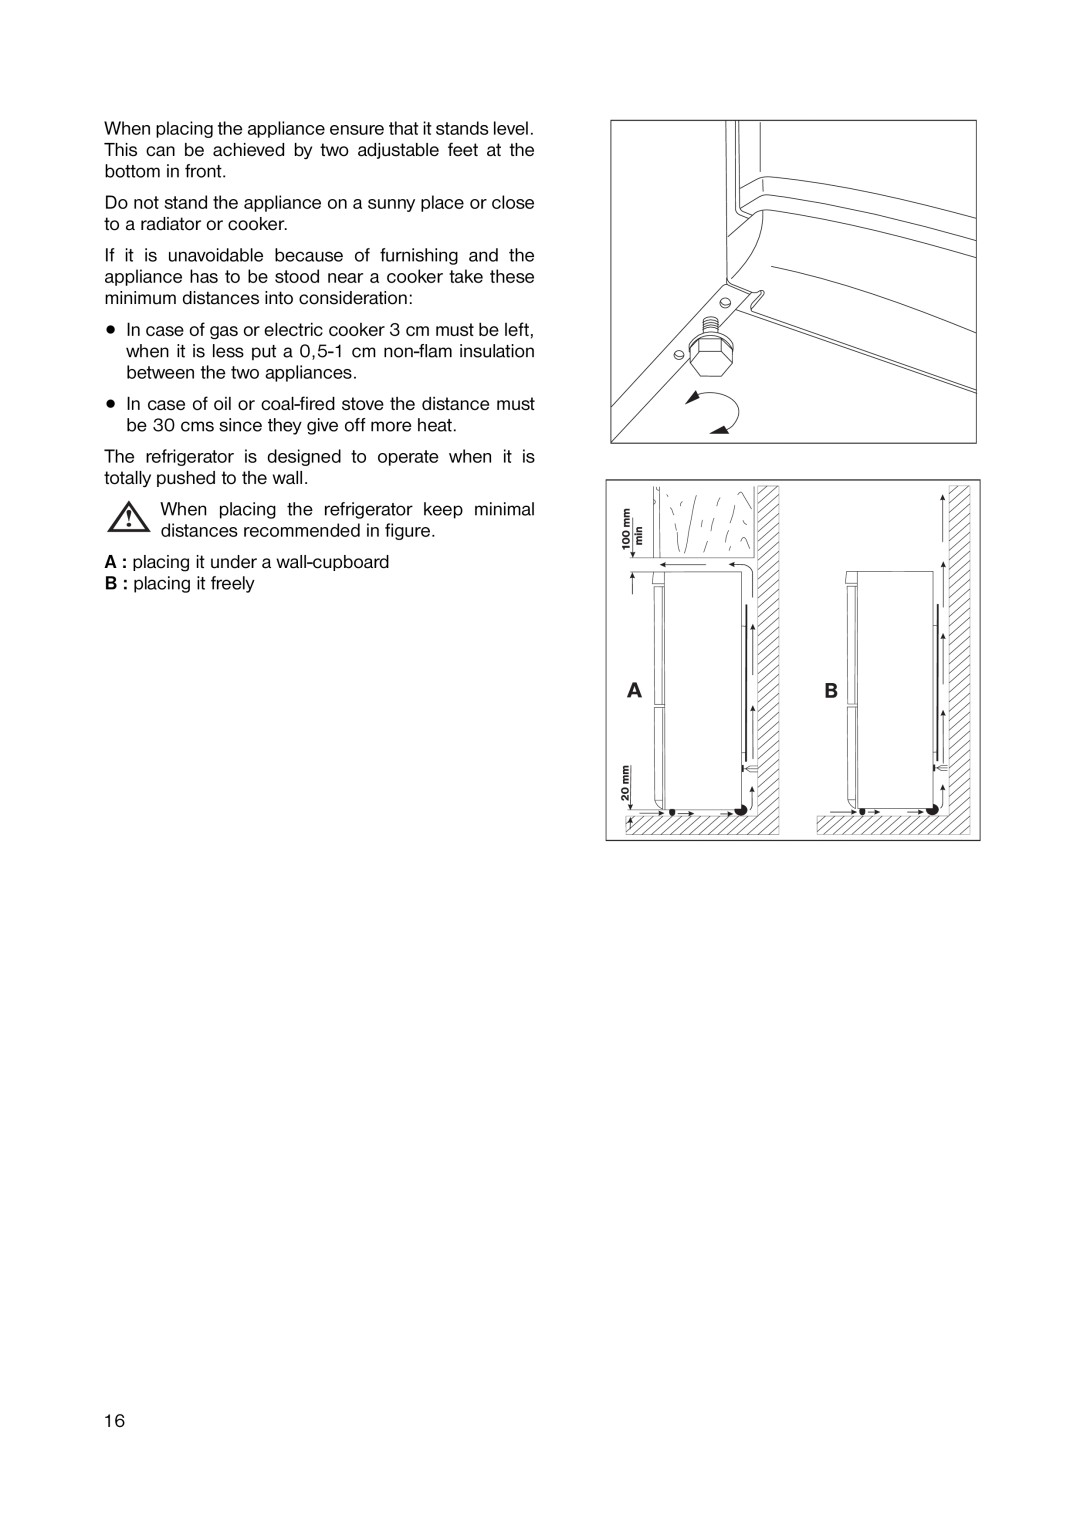 Zanussi ZERB 9043 manual A : placing it under a wall-cupboard, B placing it freely 